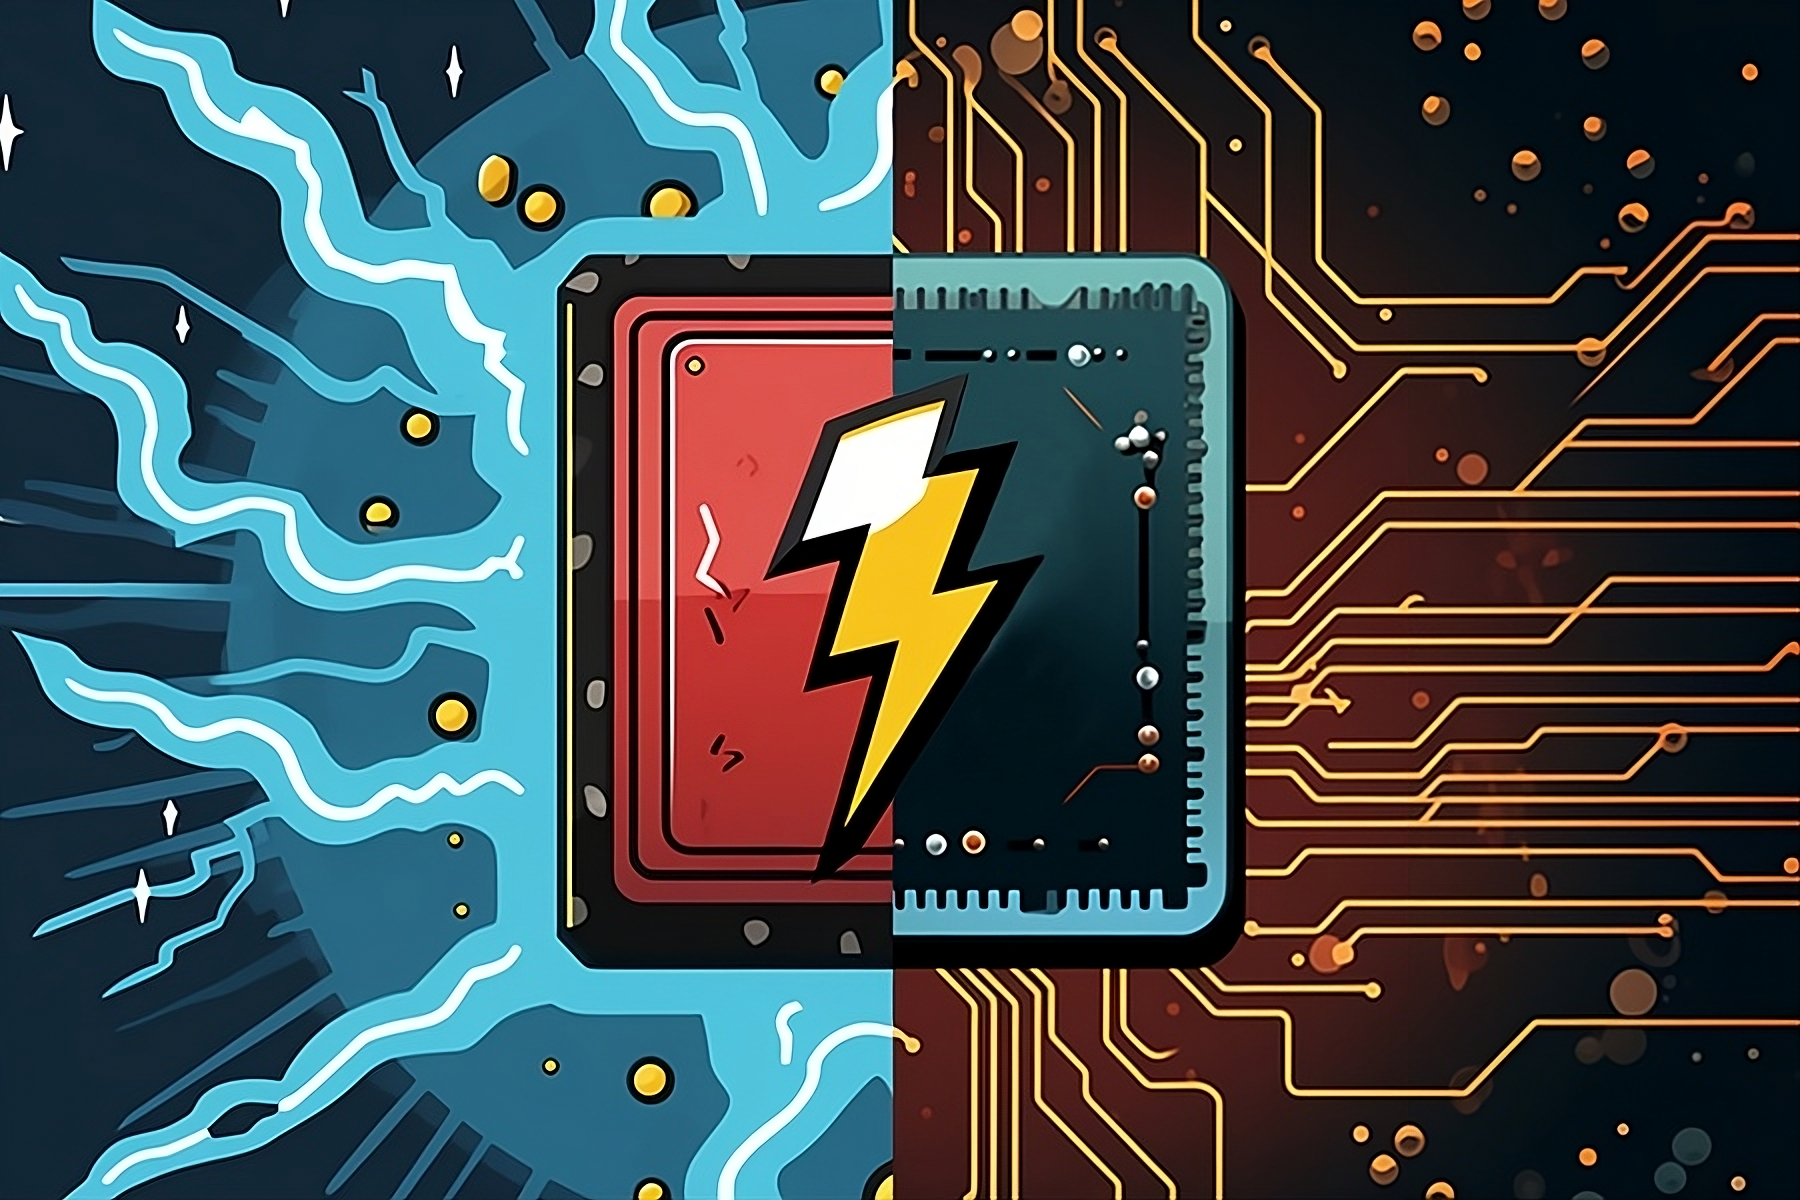 MIT researchers introduce Lightning, a reconfigurable photonic-electronic smartNIC that serves real-time deep neural network inference requests at 100 Gbps (Credits:Alex Shipps/MIT CSAIL via Midjourney).